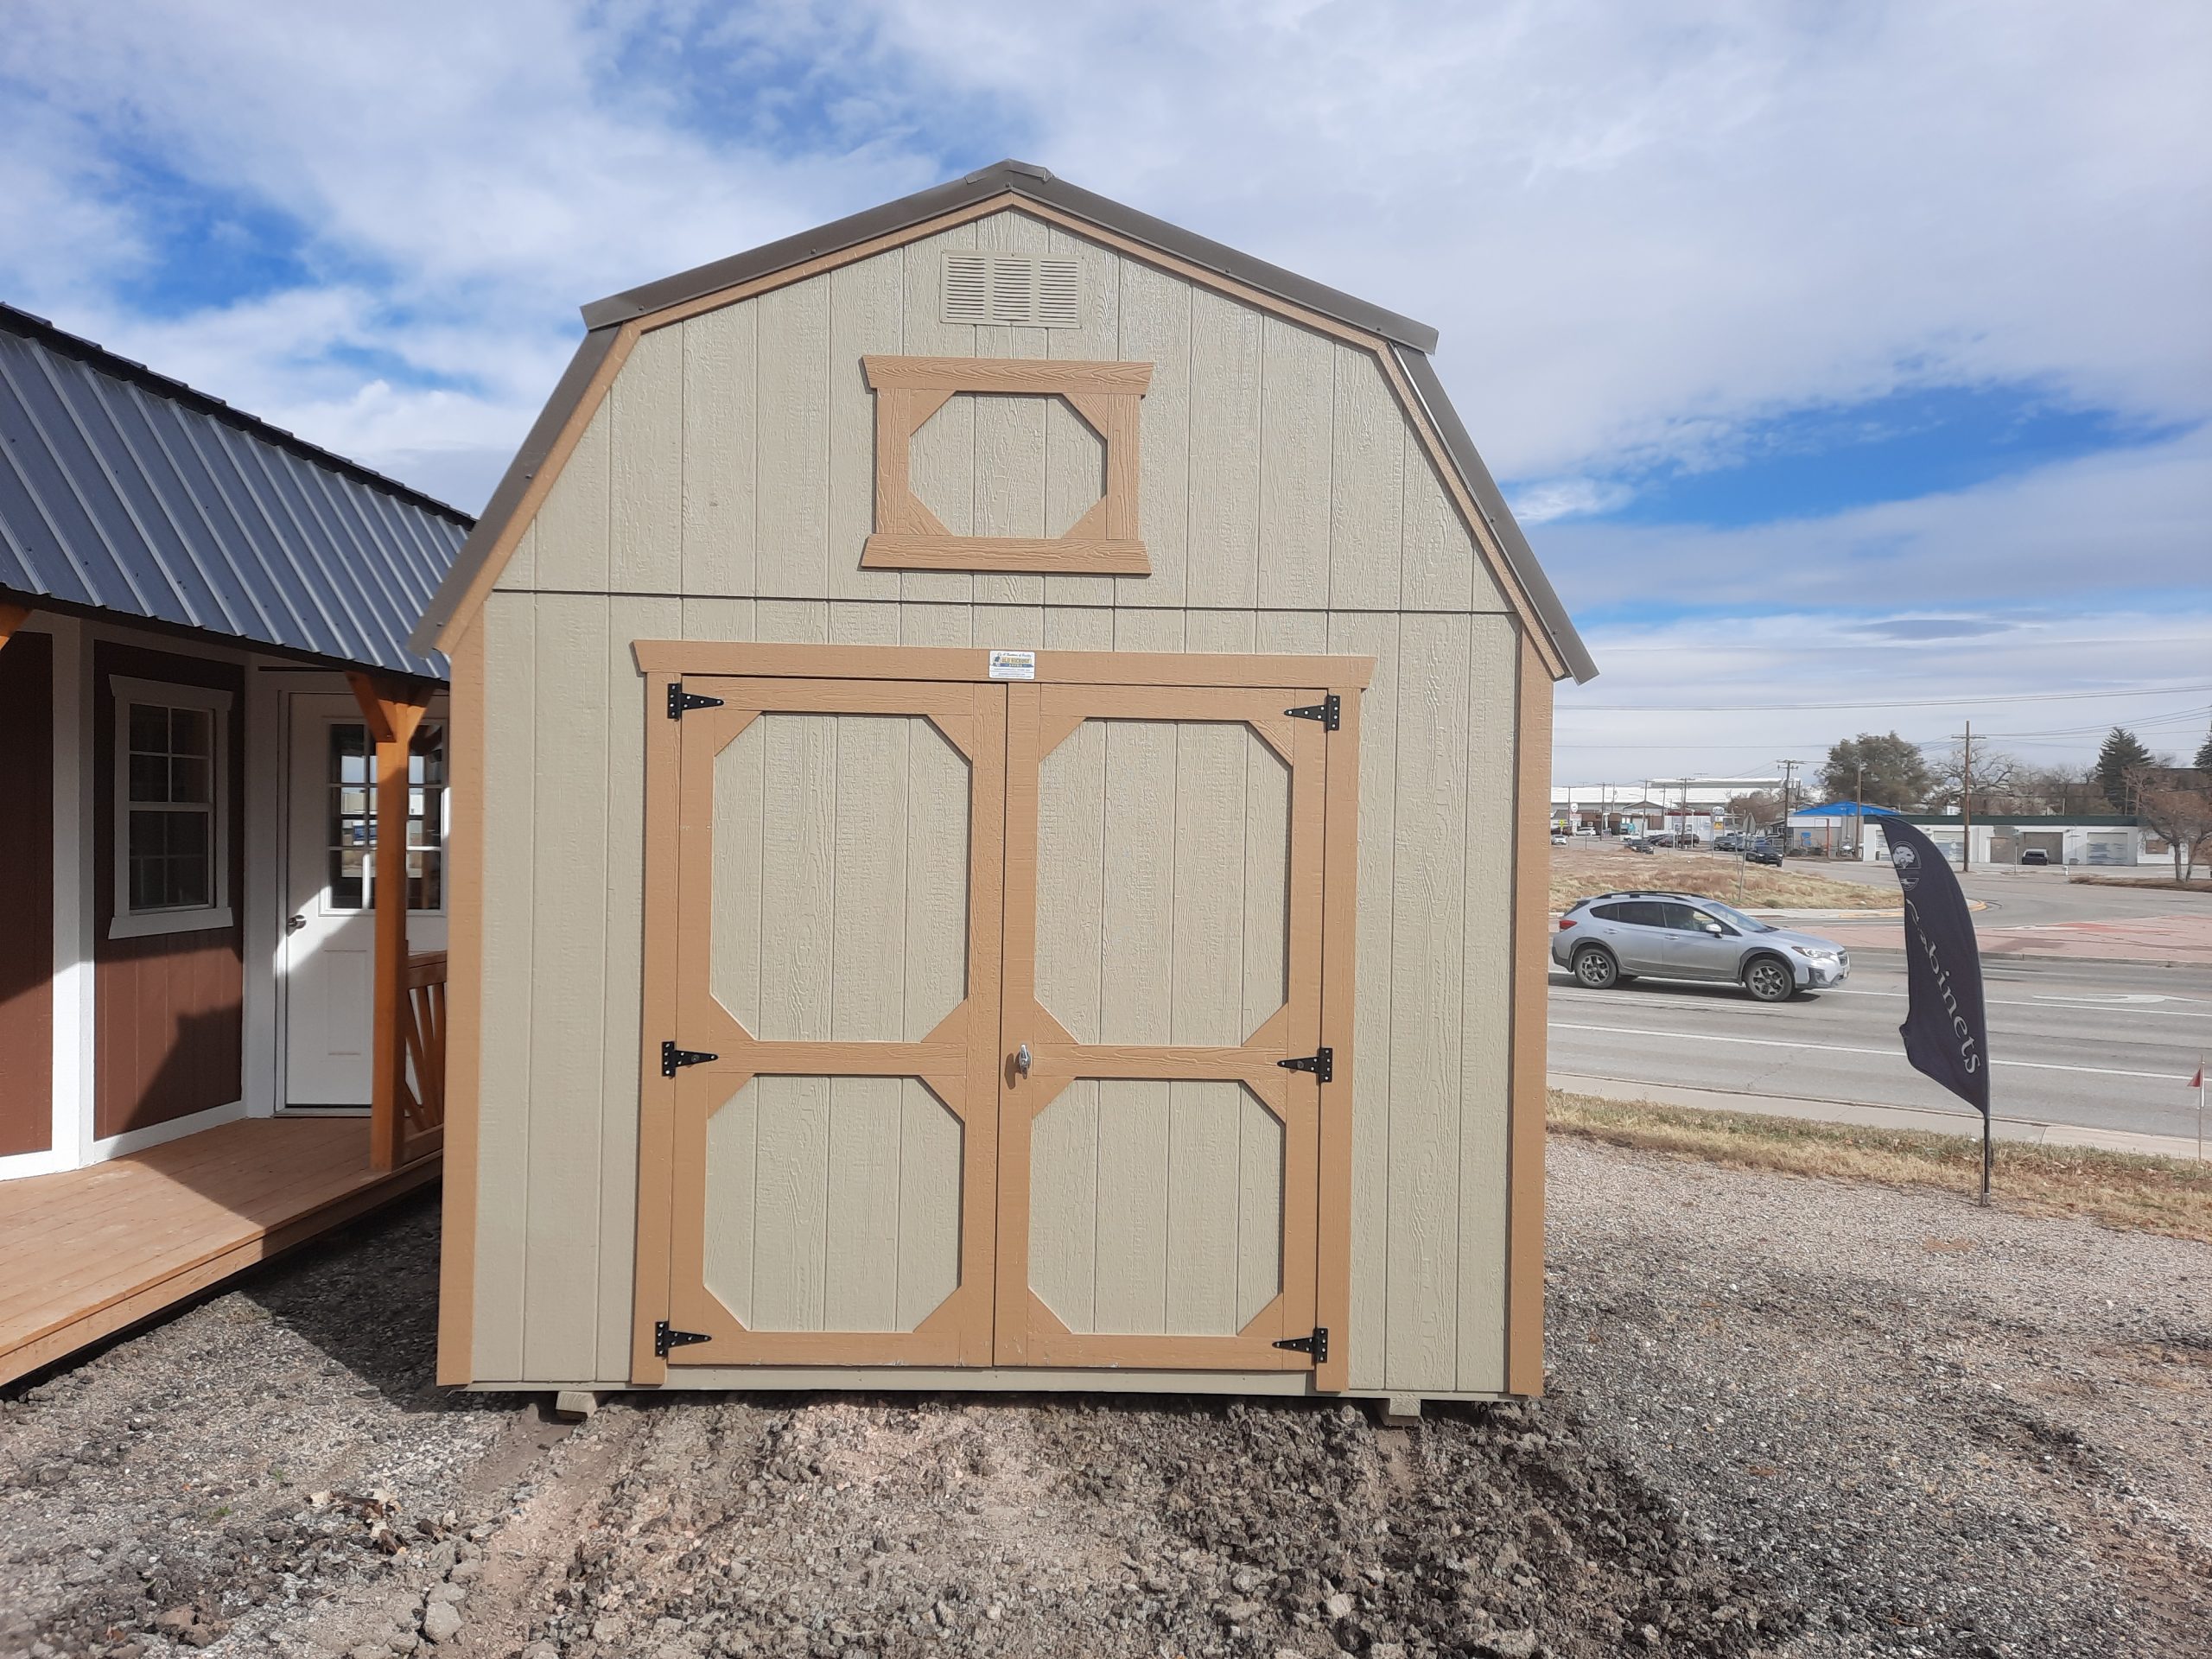 Buy Now: 10×12 Lofted Barn Shed For Sale Baked Clay Paint or Custom Order at French Creek Design Shed Sales in Casper, WY